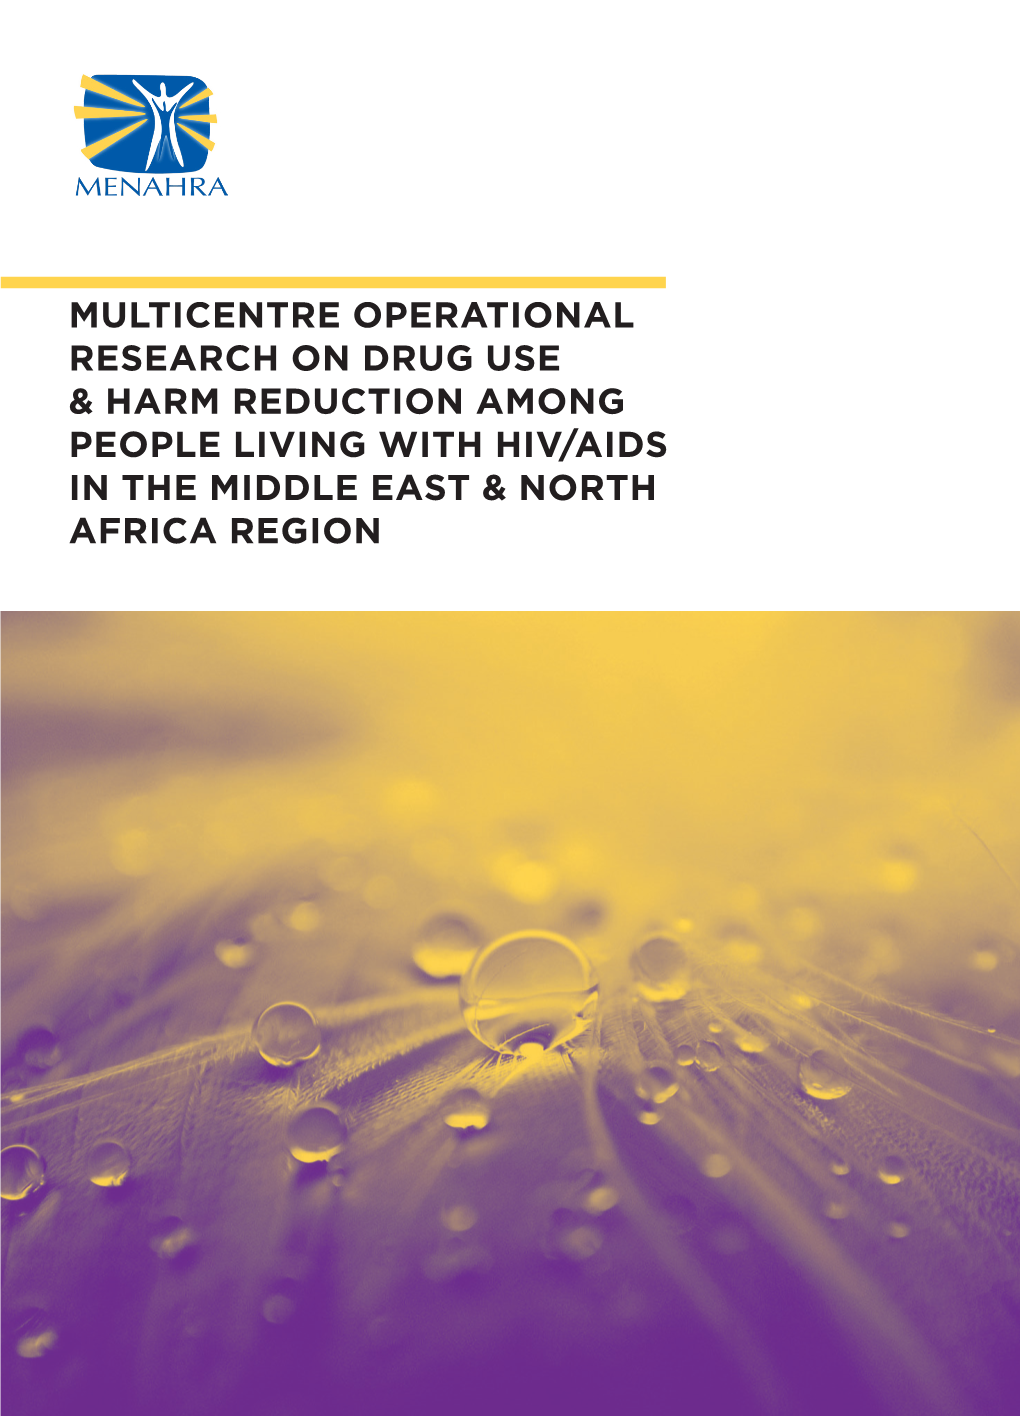 Multicentre Operational Research on Drug Use & Harm Reduction Among